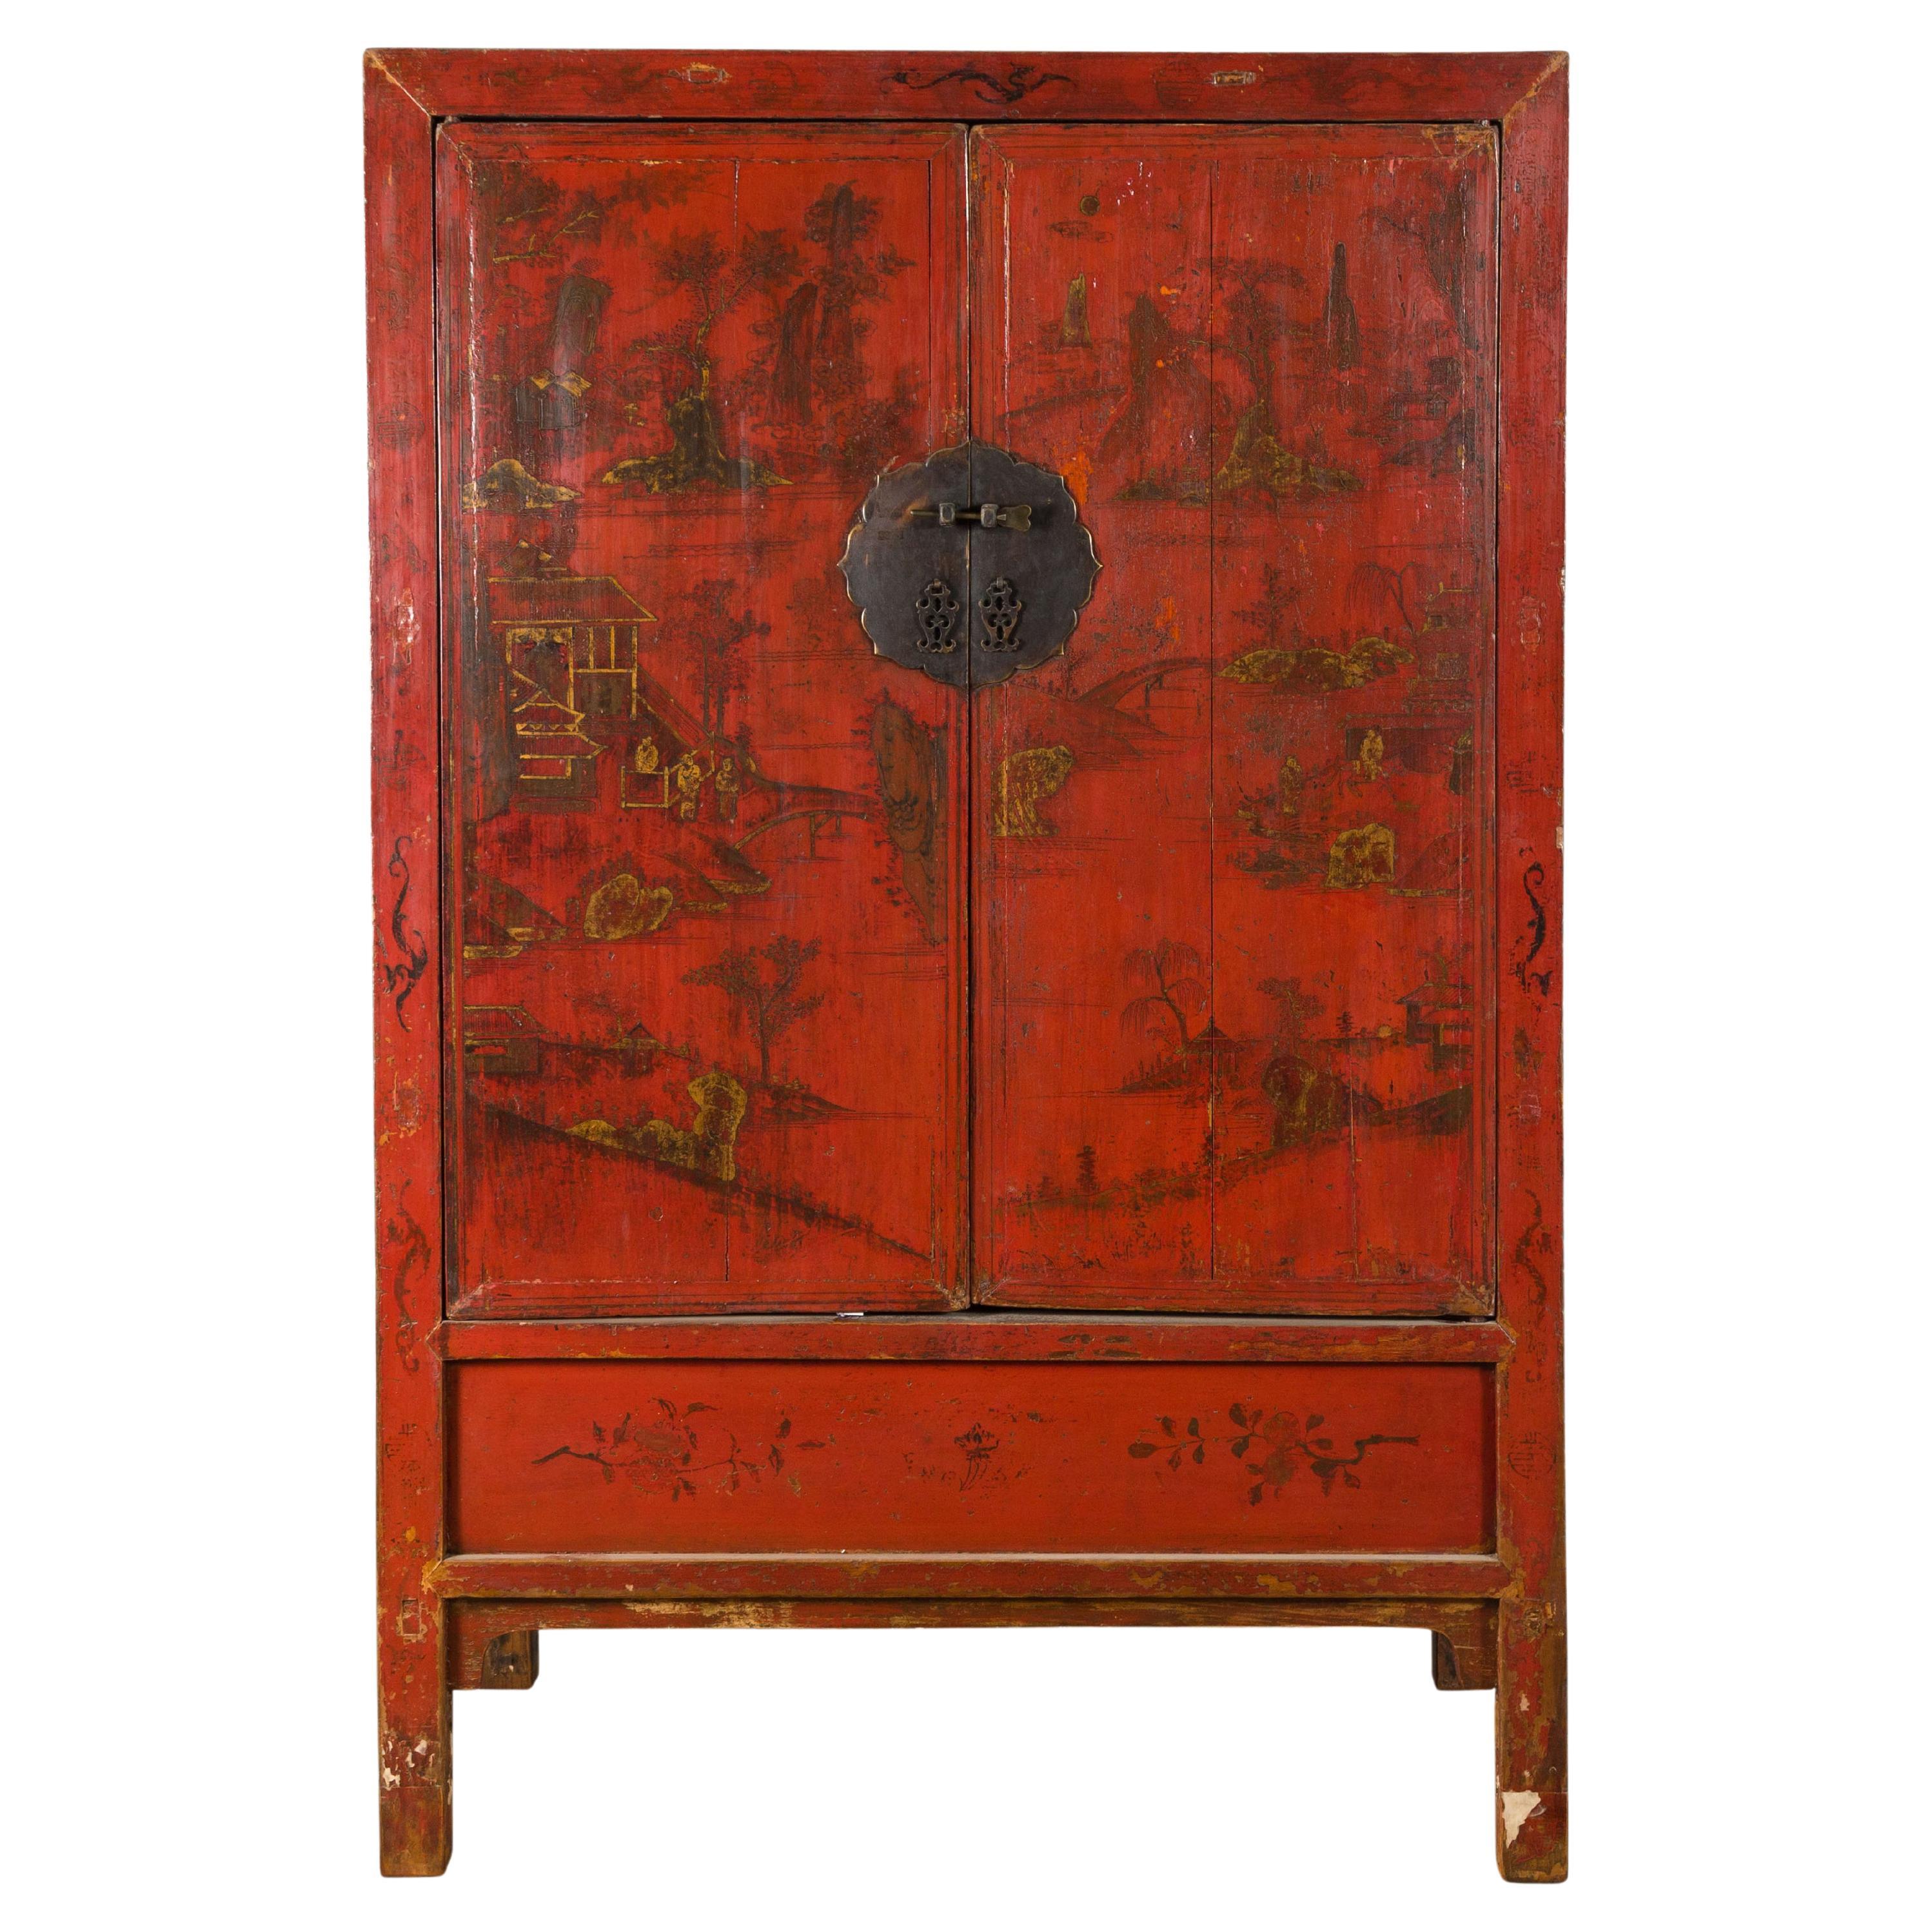 Qing Dynasty 19th Century Hand-Painted Cabinet with Original Red Lacquer For Sale